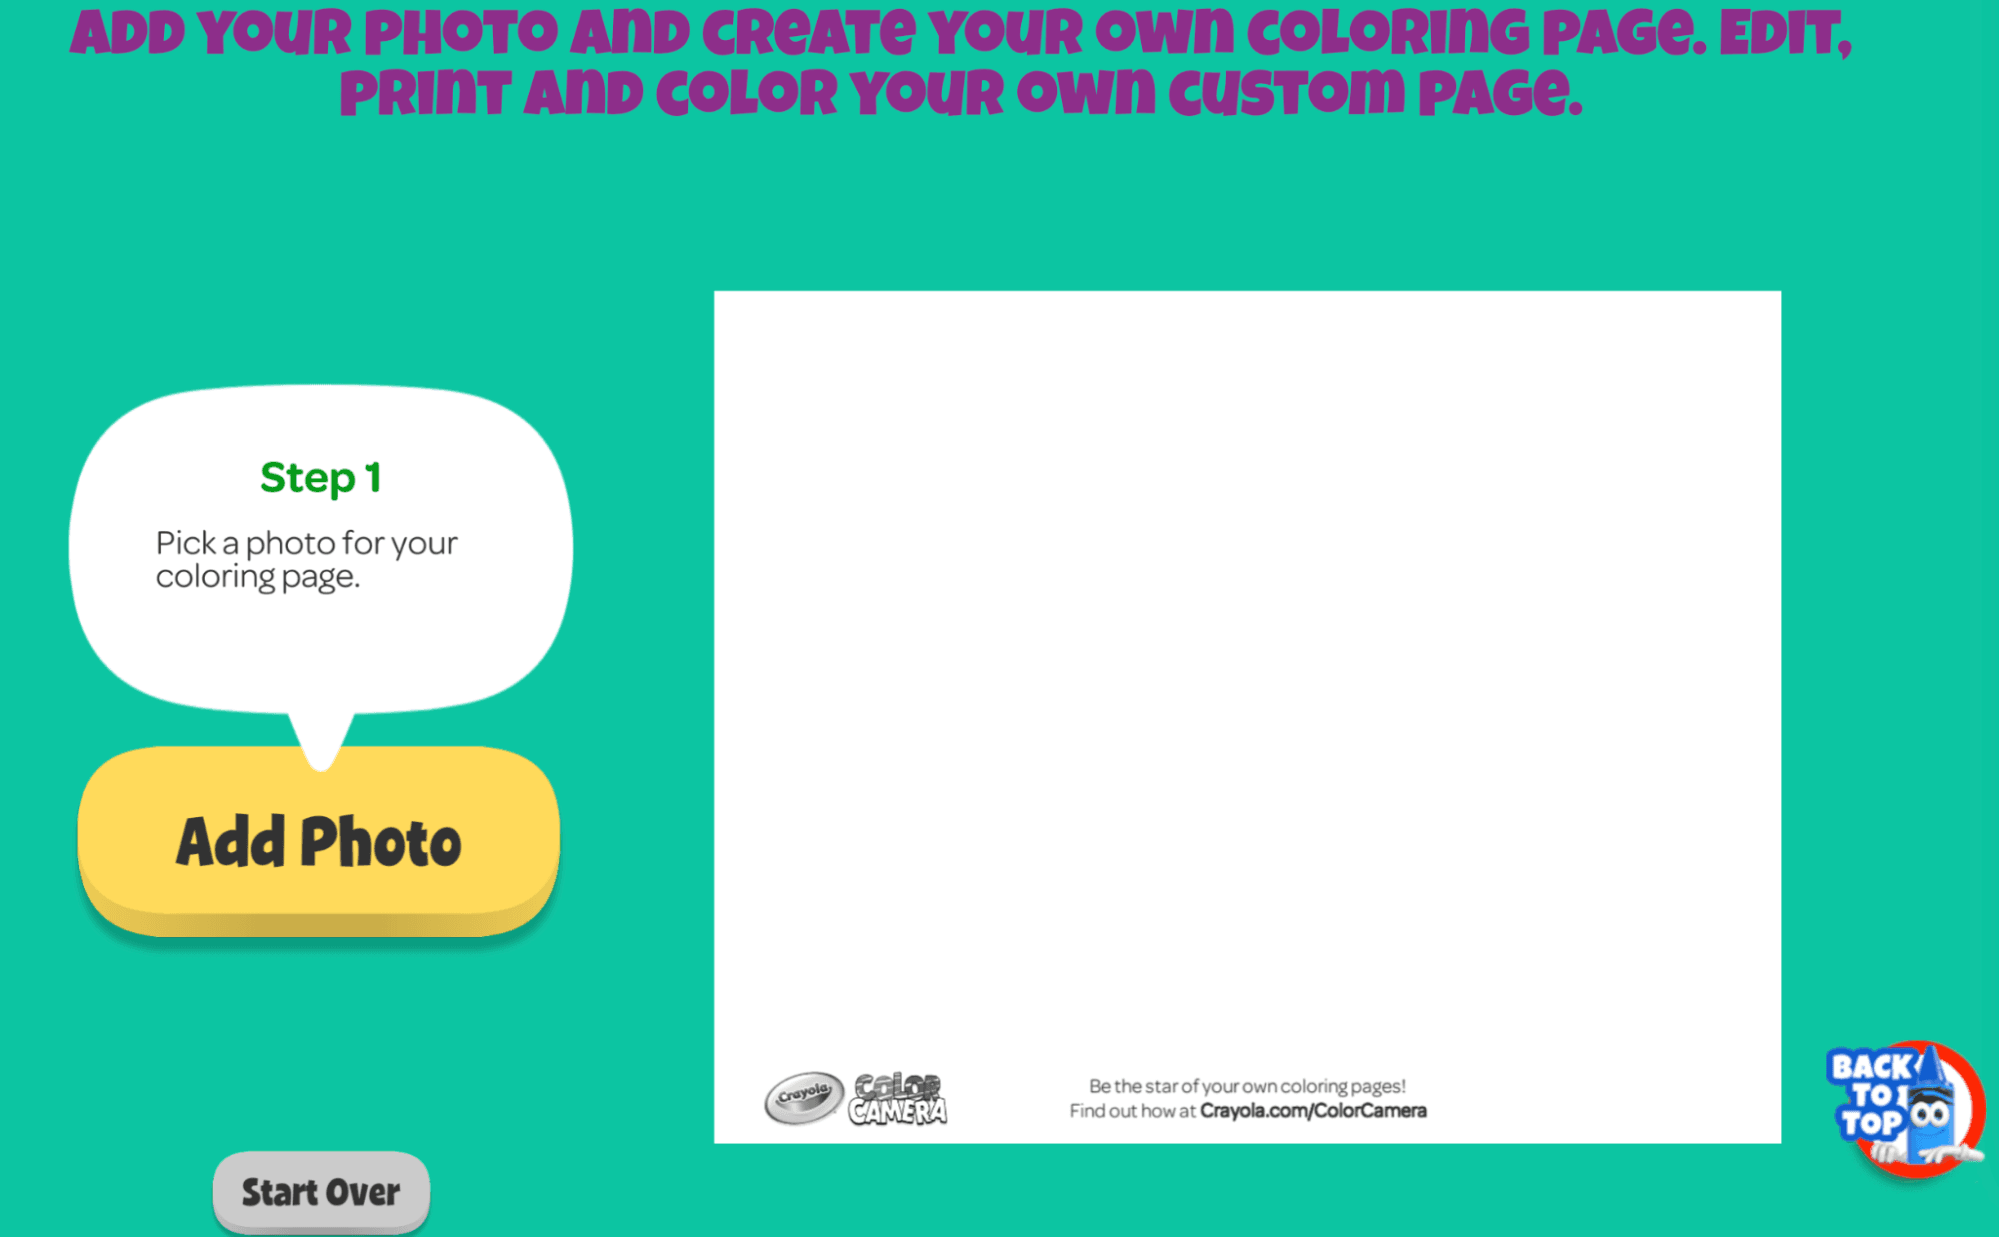 The page that shows how to turn a photo into a coloring page in Crayola Color Camera